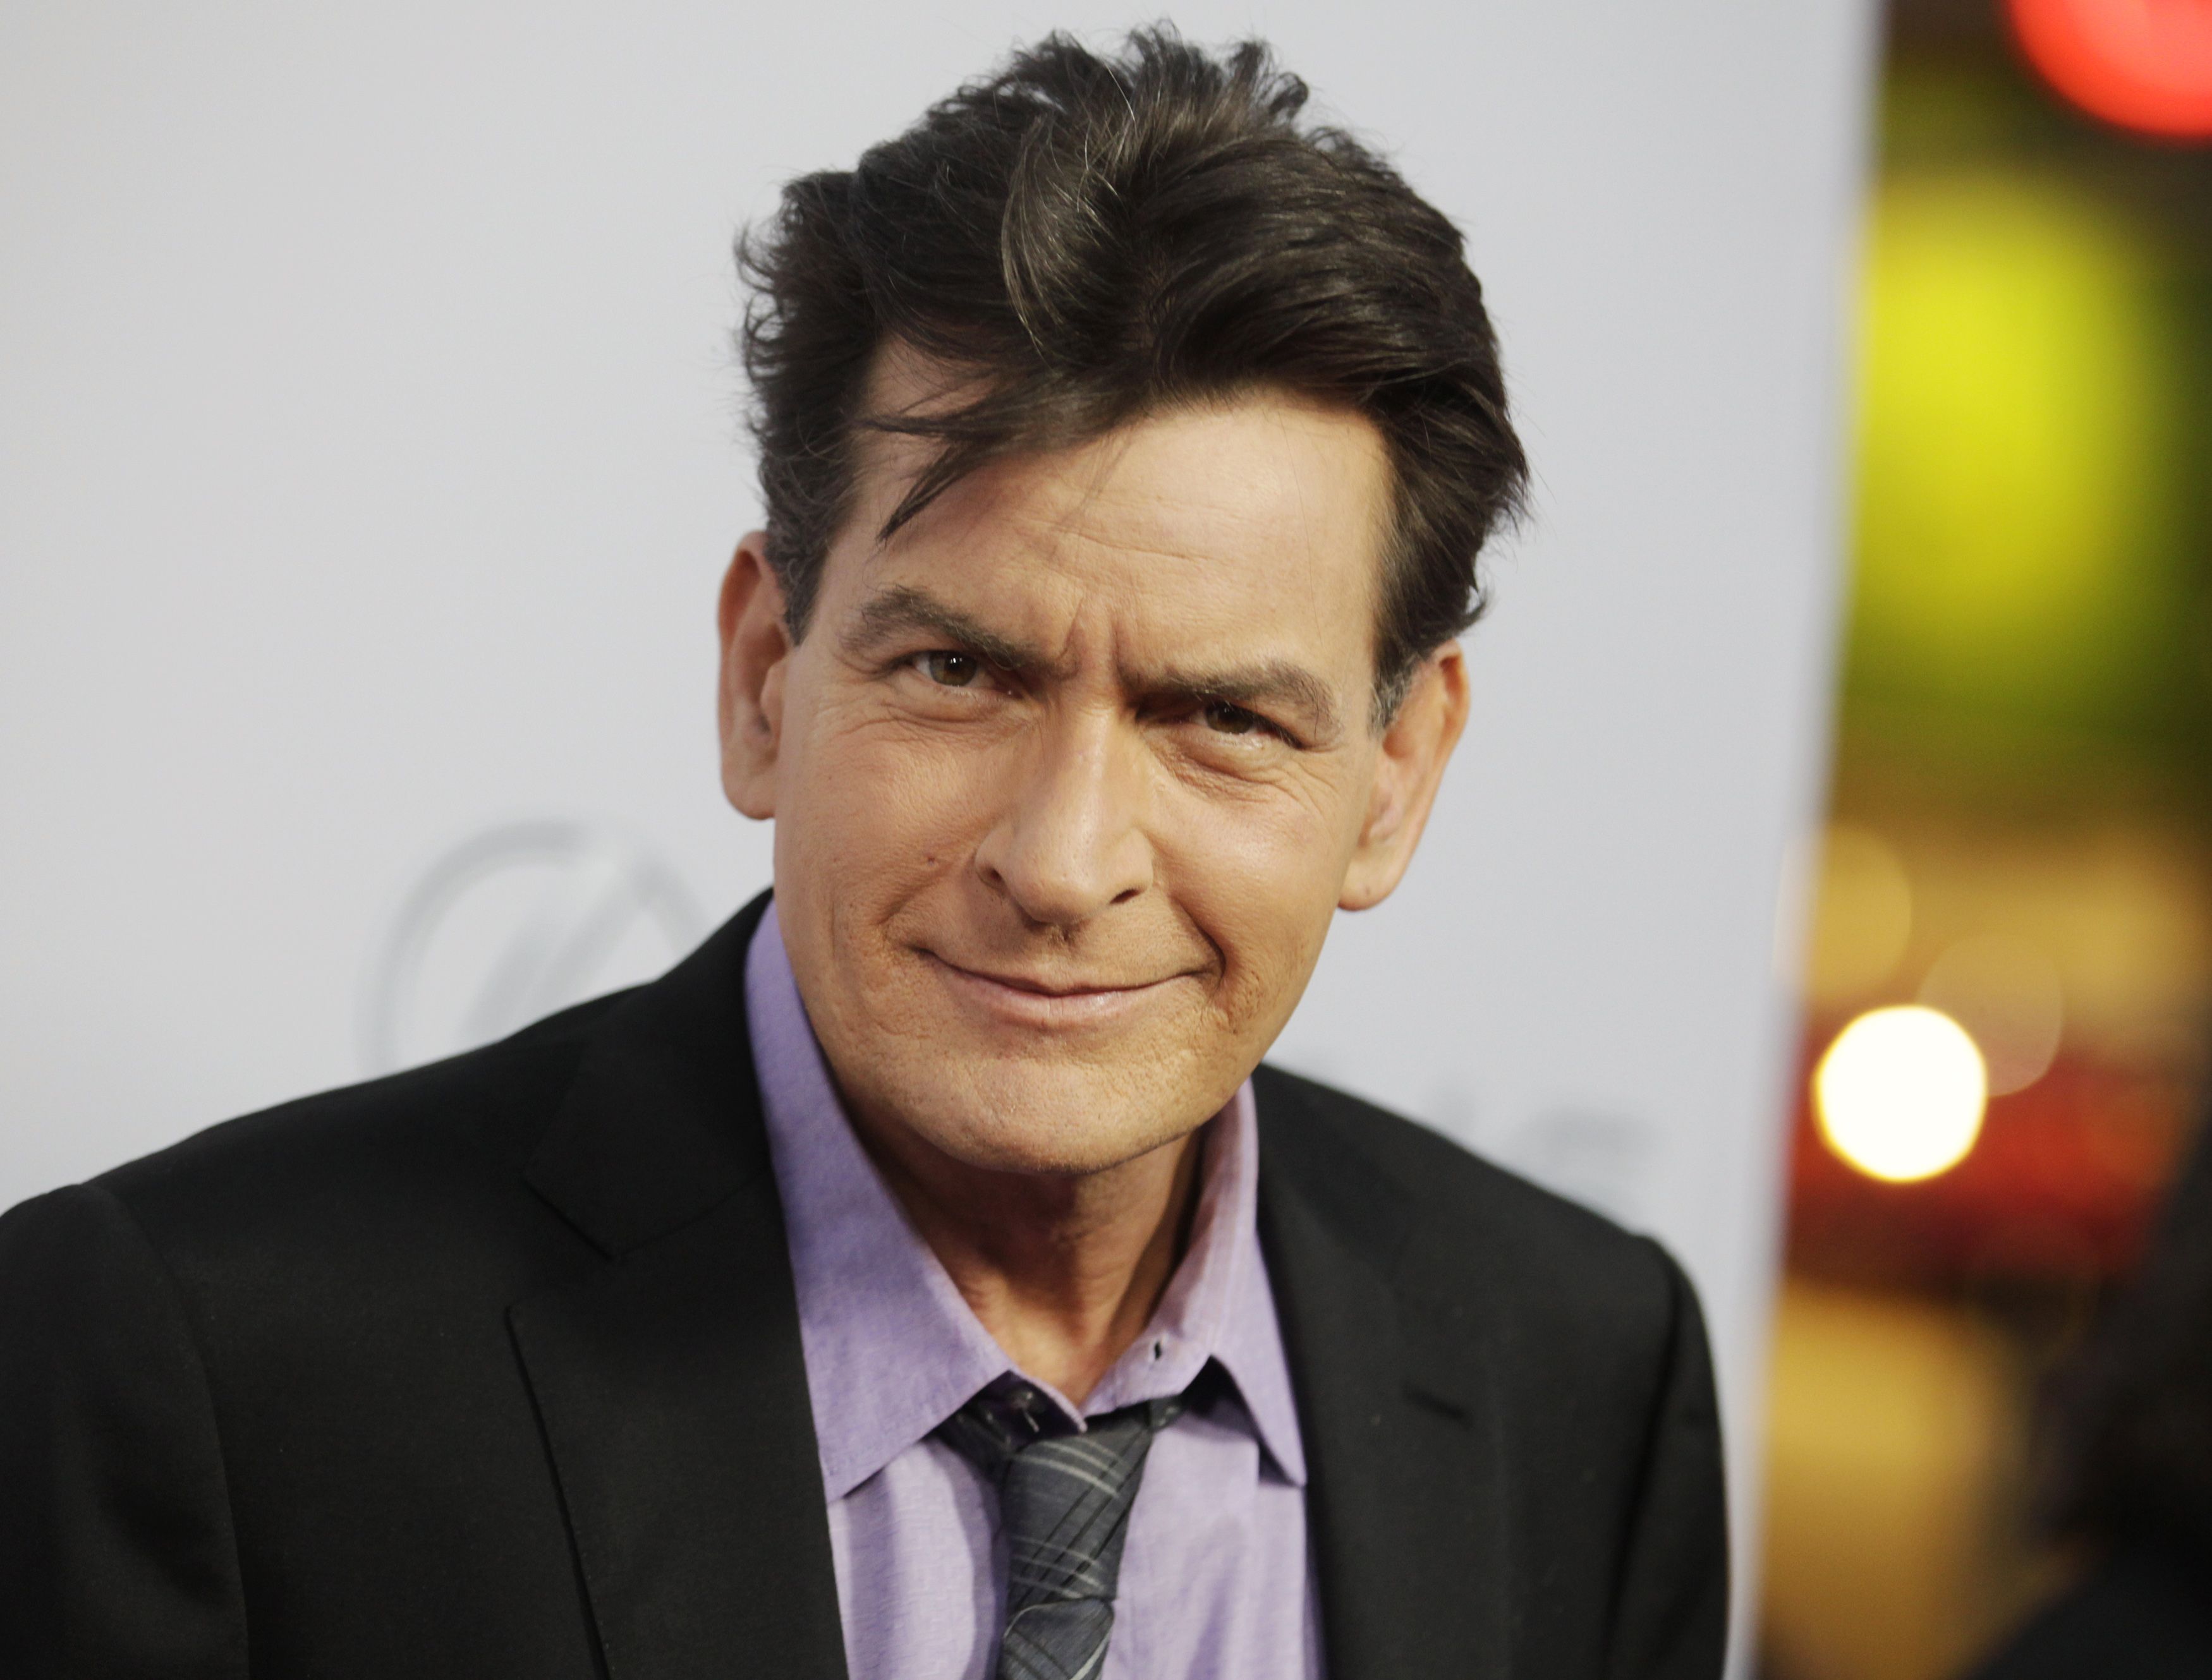 images-of-charlie-sheen